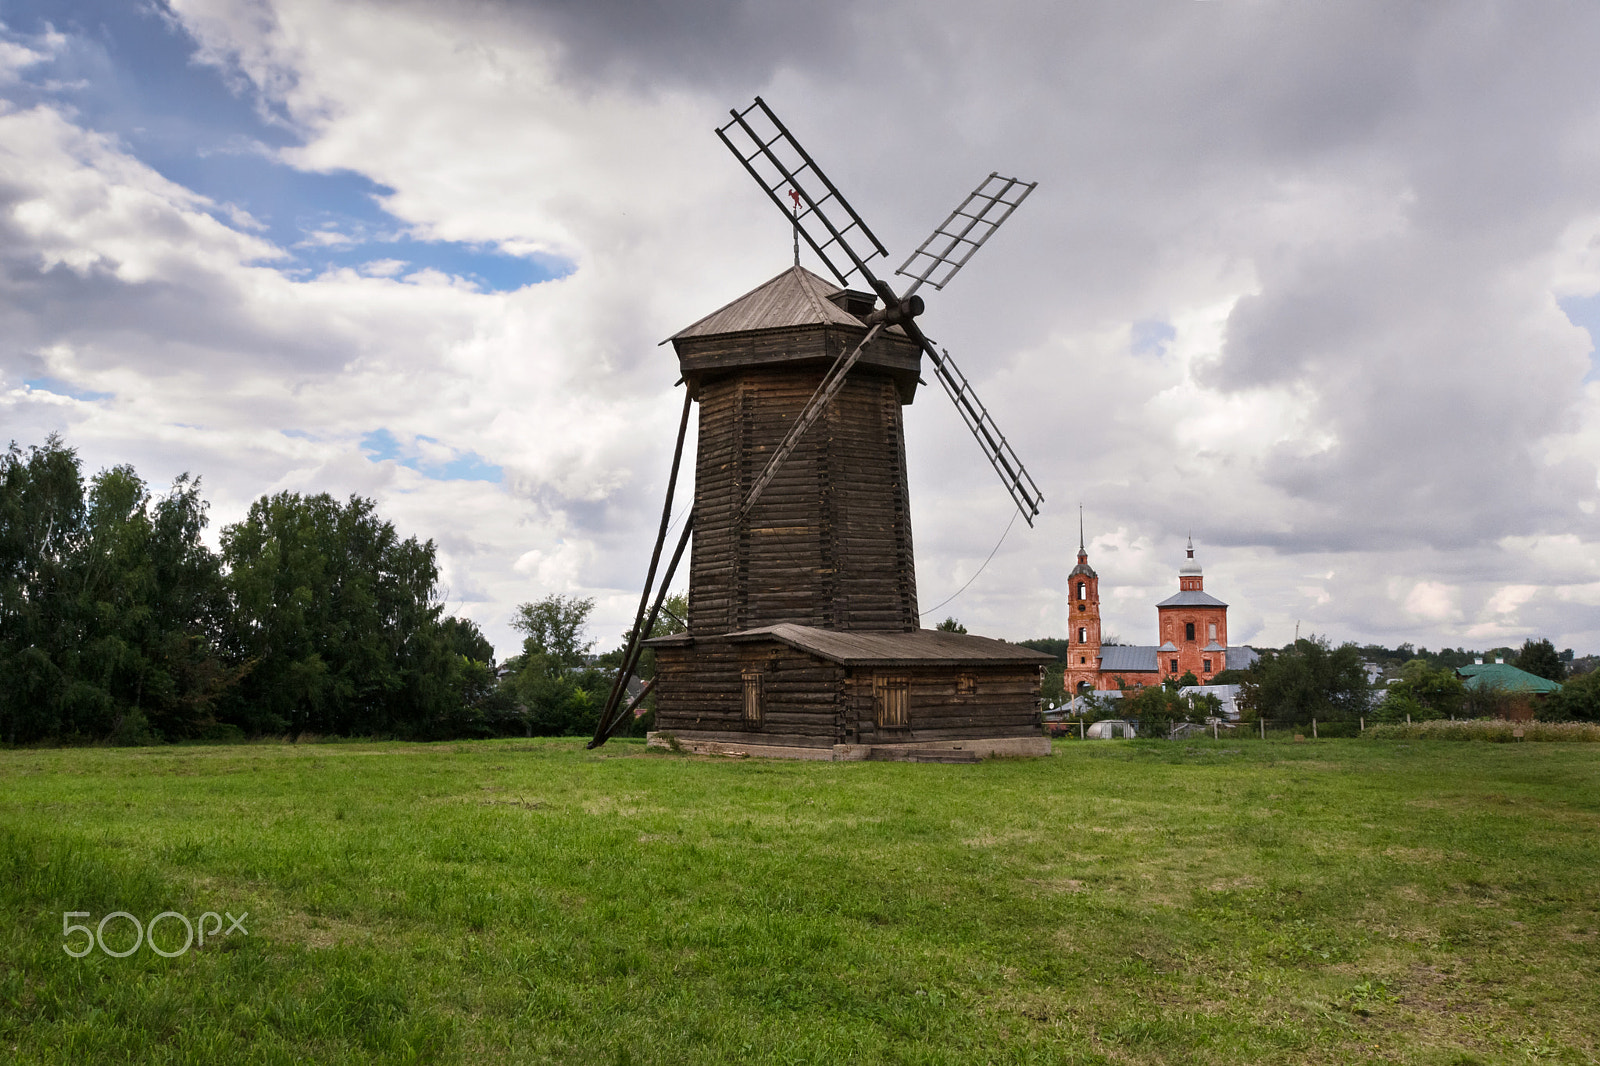 Nikon D3100 + Tamron SP AF 10-24mm F3.5-4.5 Di II LD Aspherical (IF) sample photo. Old wooden windmill in suzdal photography